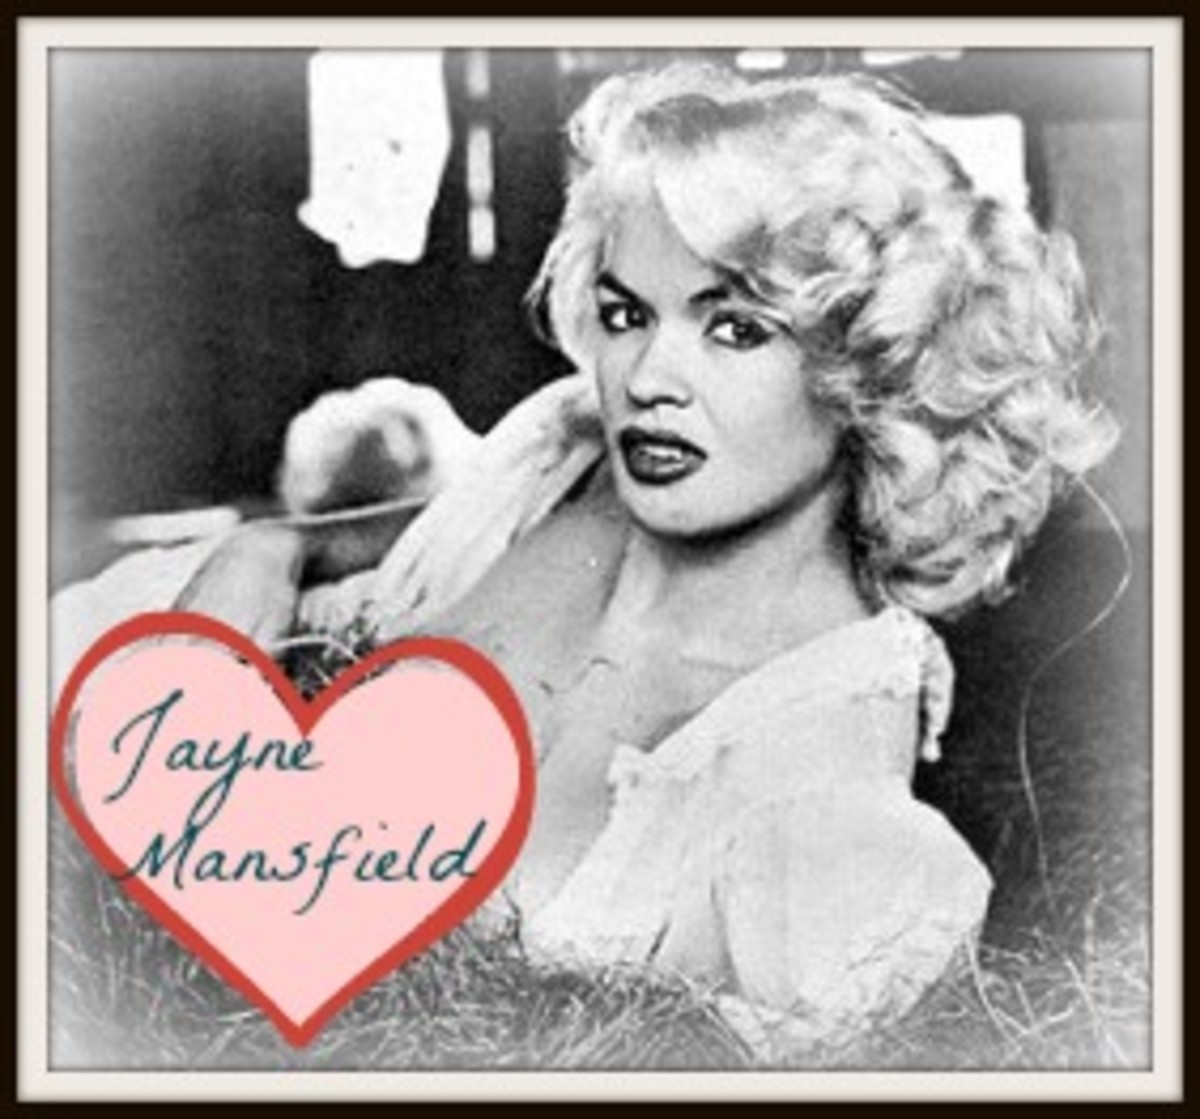 Jayne Mansfield: Biography and Photos 